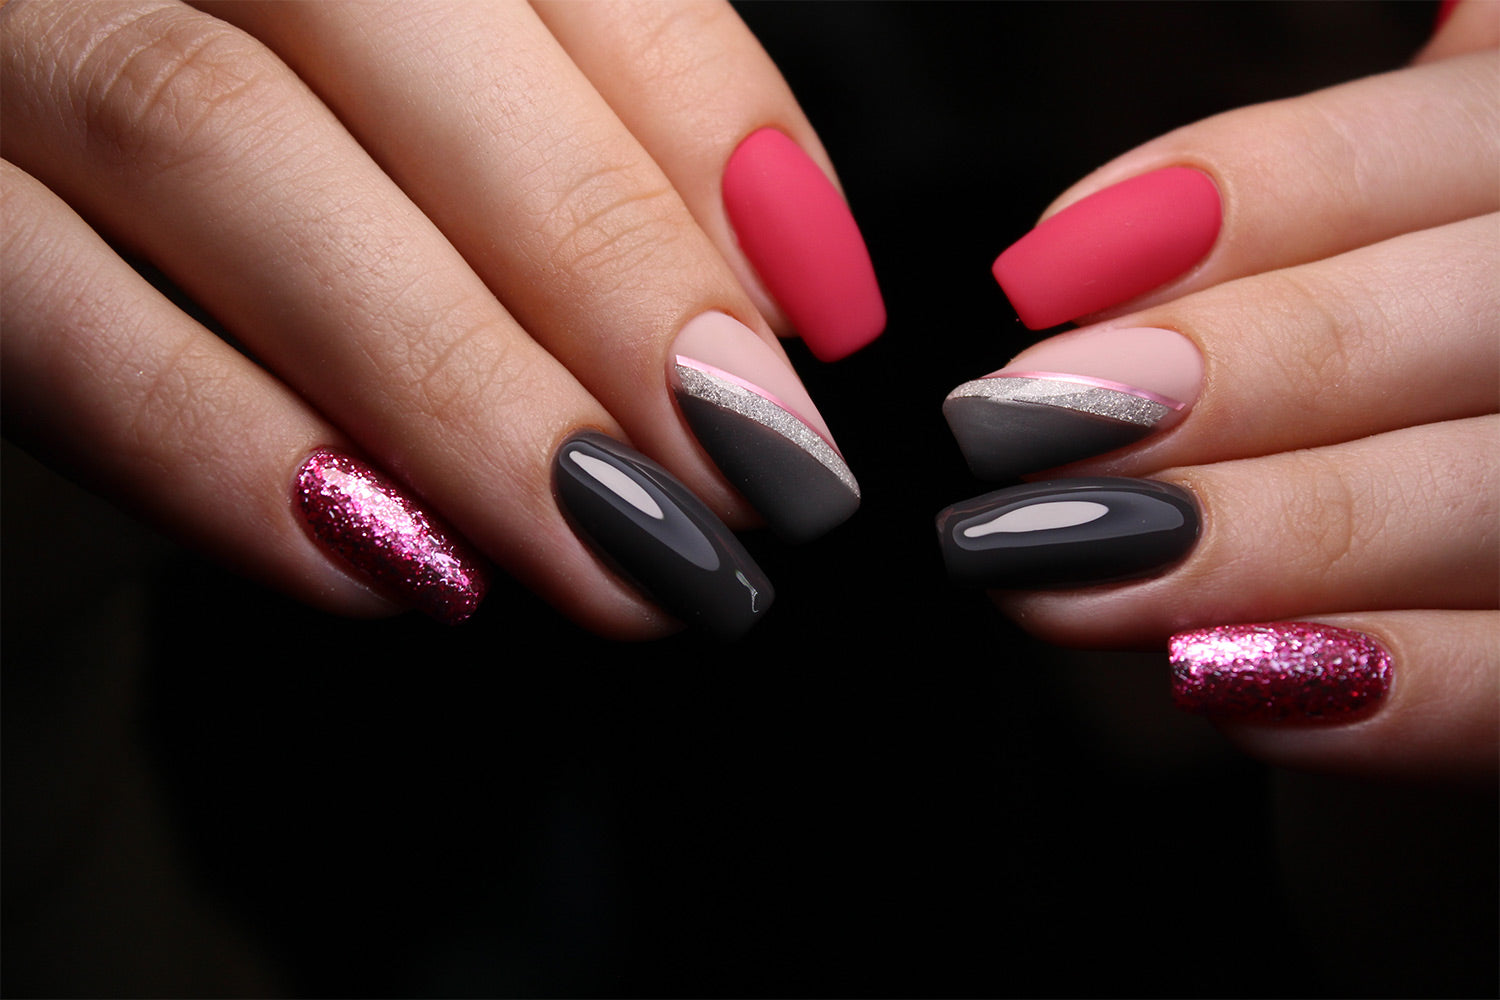 1. Coffin shaped gel nails - wide 4